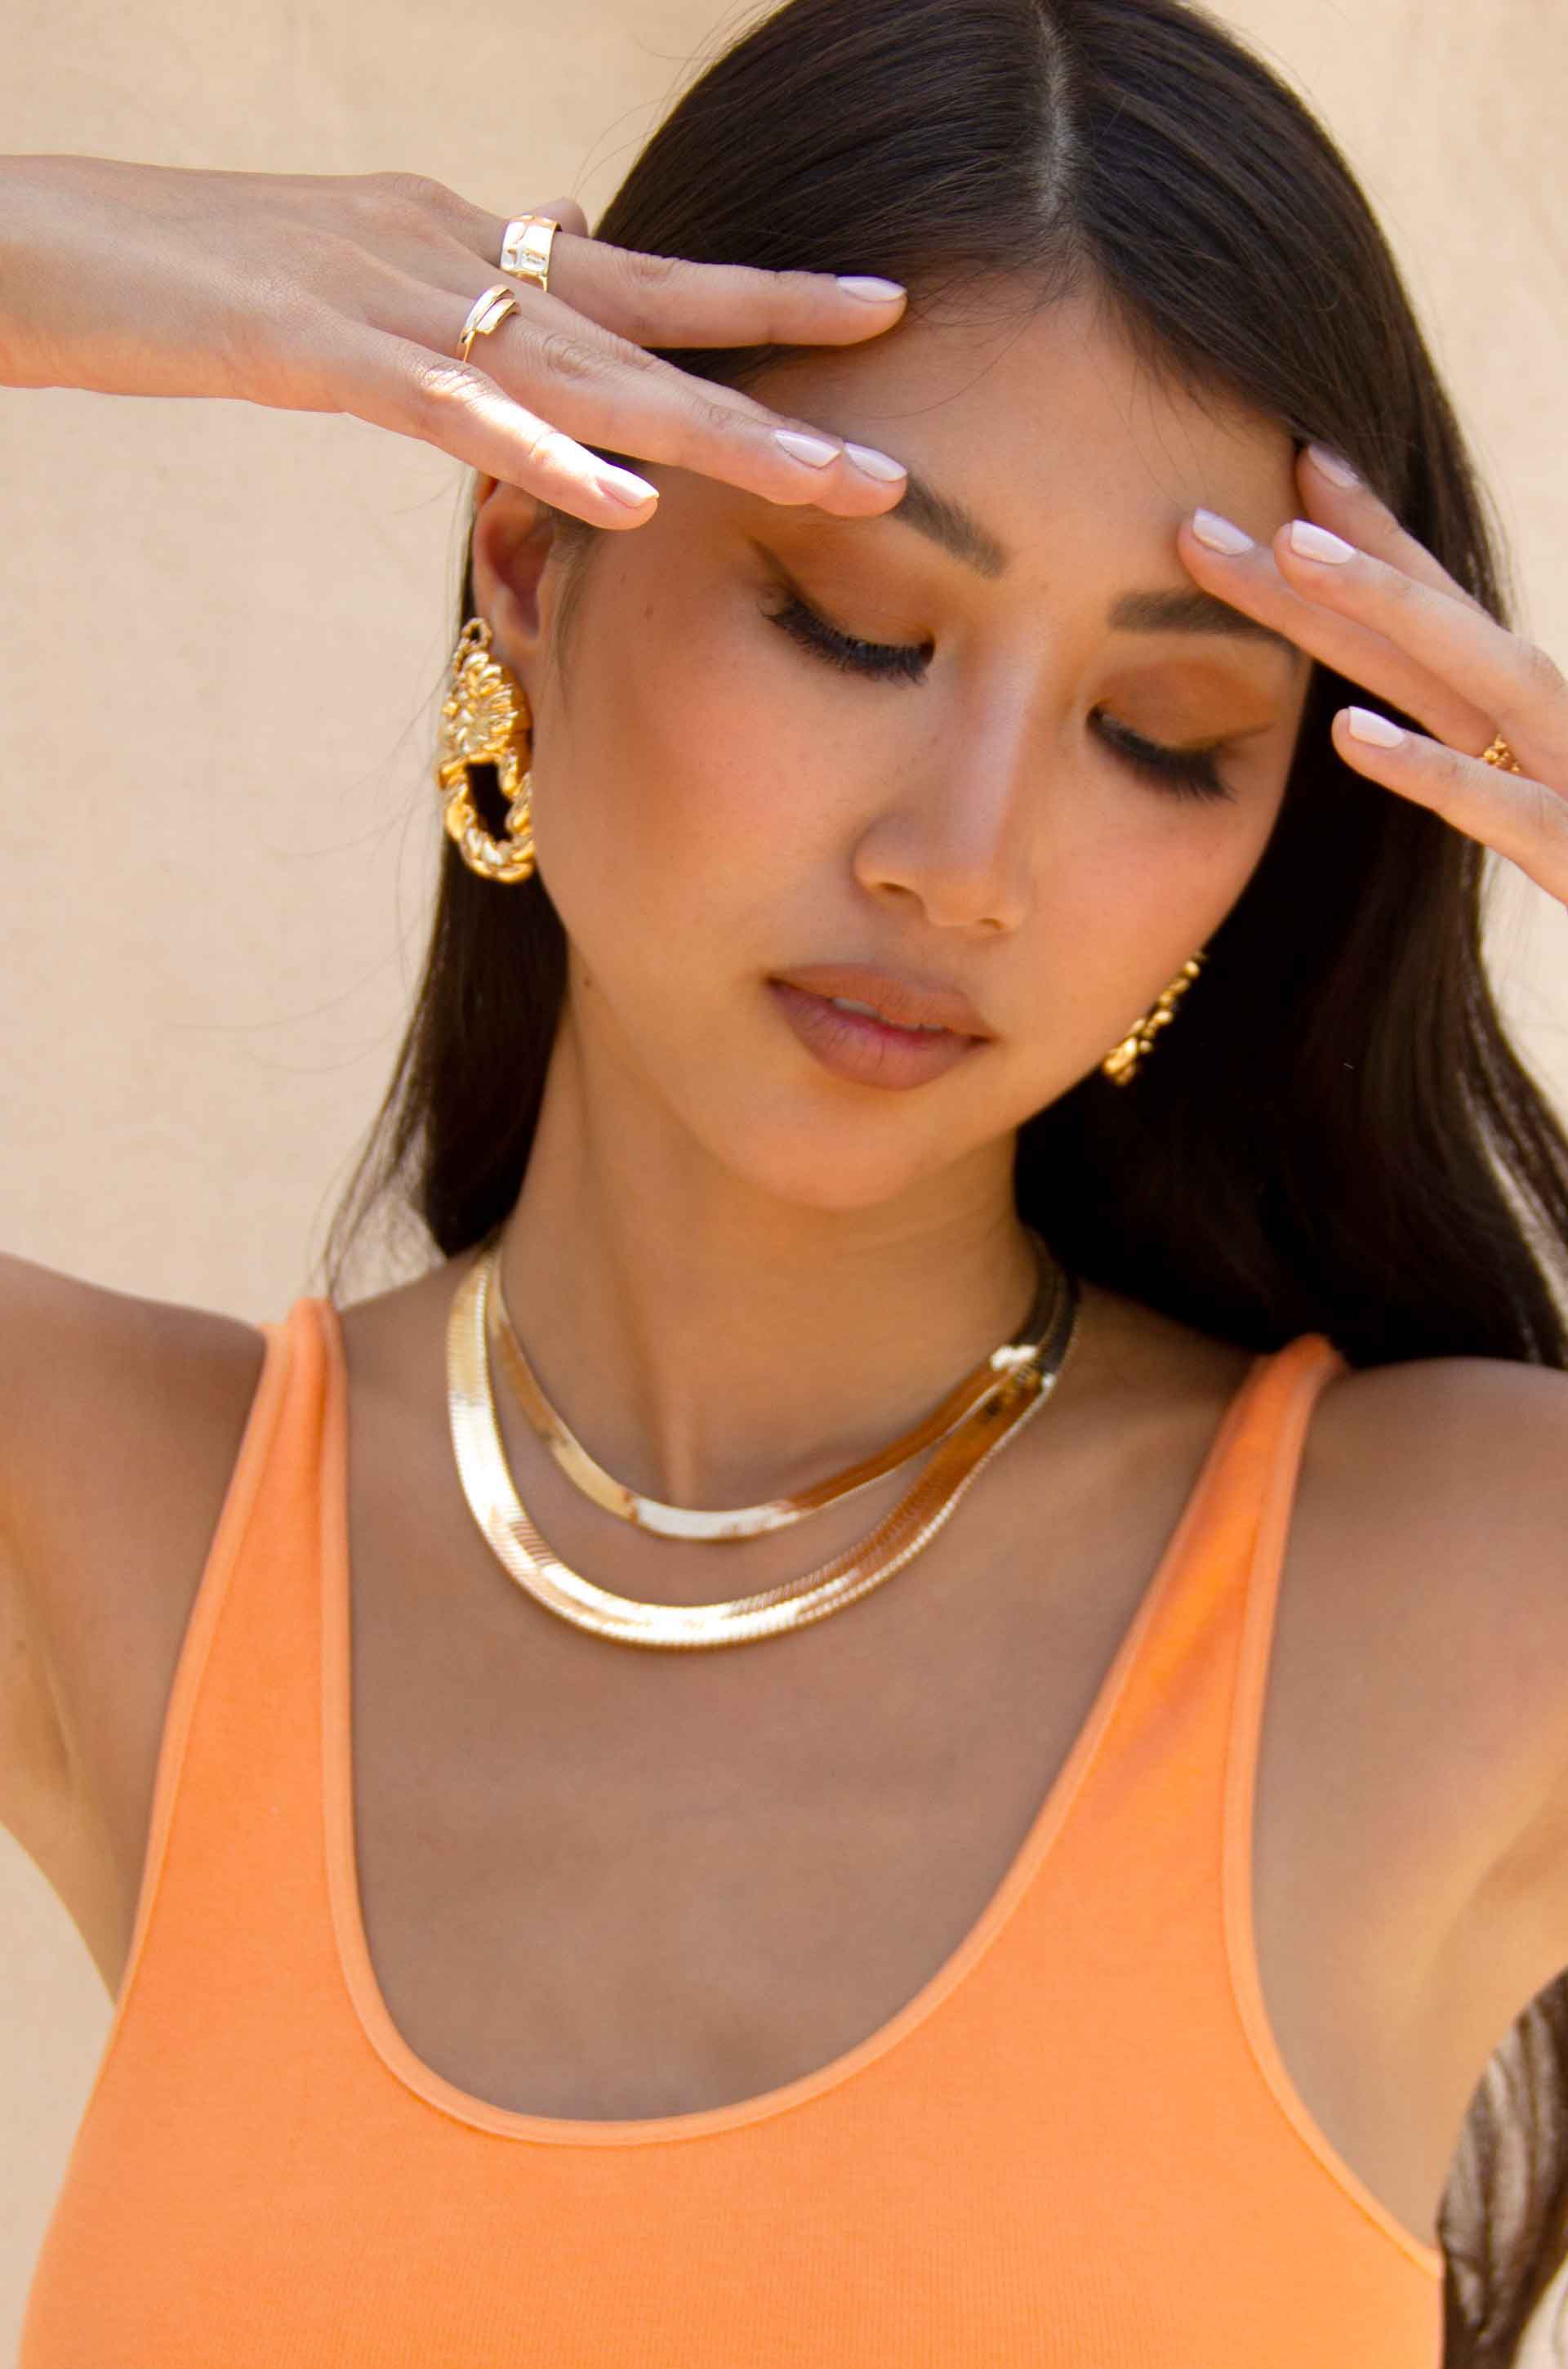 A model wearing ettika 18k gold plated necklaces and statement earrings